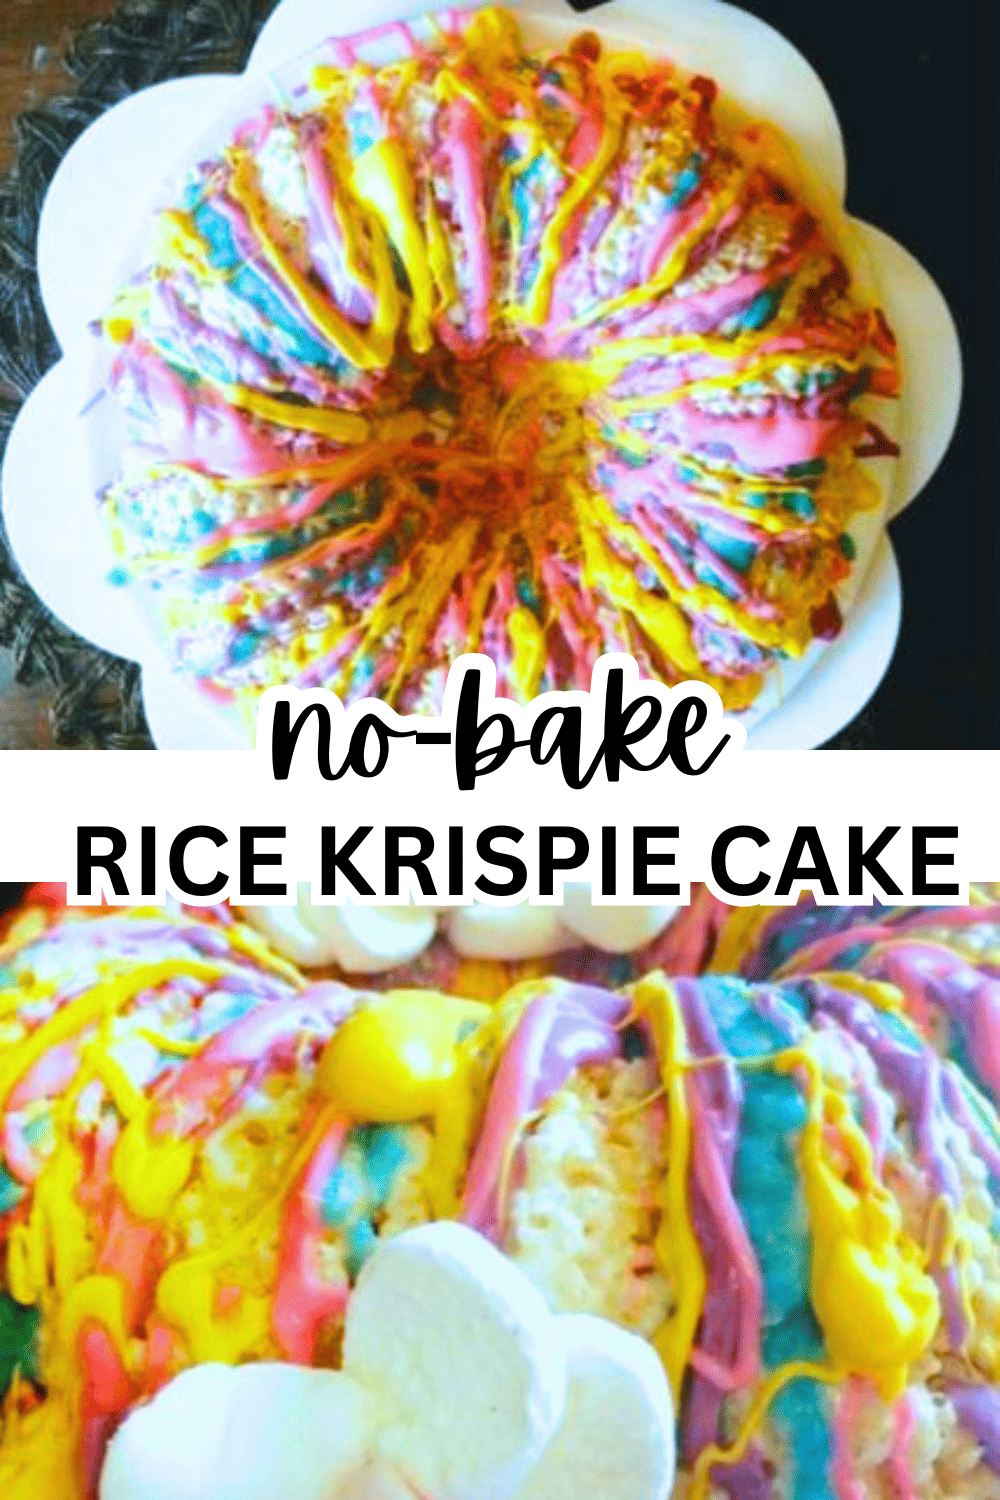 Easy No Bake Rice Krispie Cake Recipe top view and side view of no bake cake with marshmallow flowers